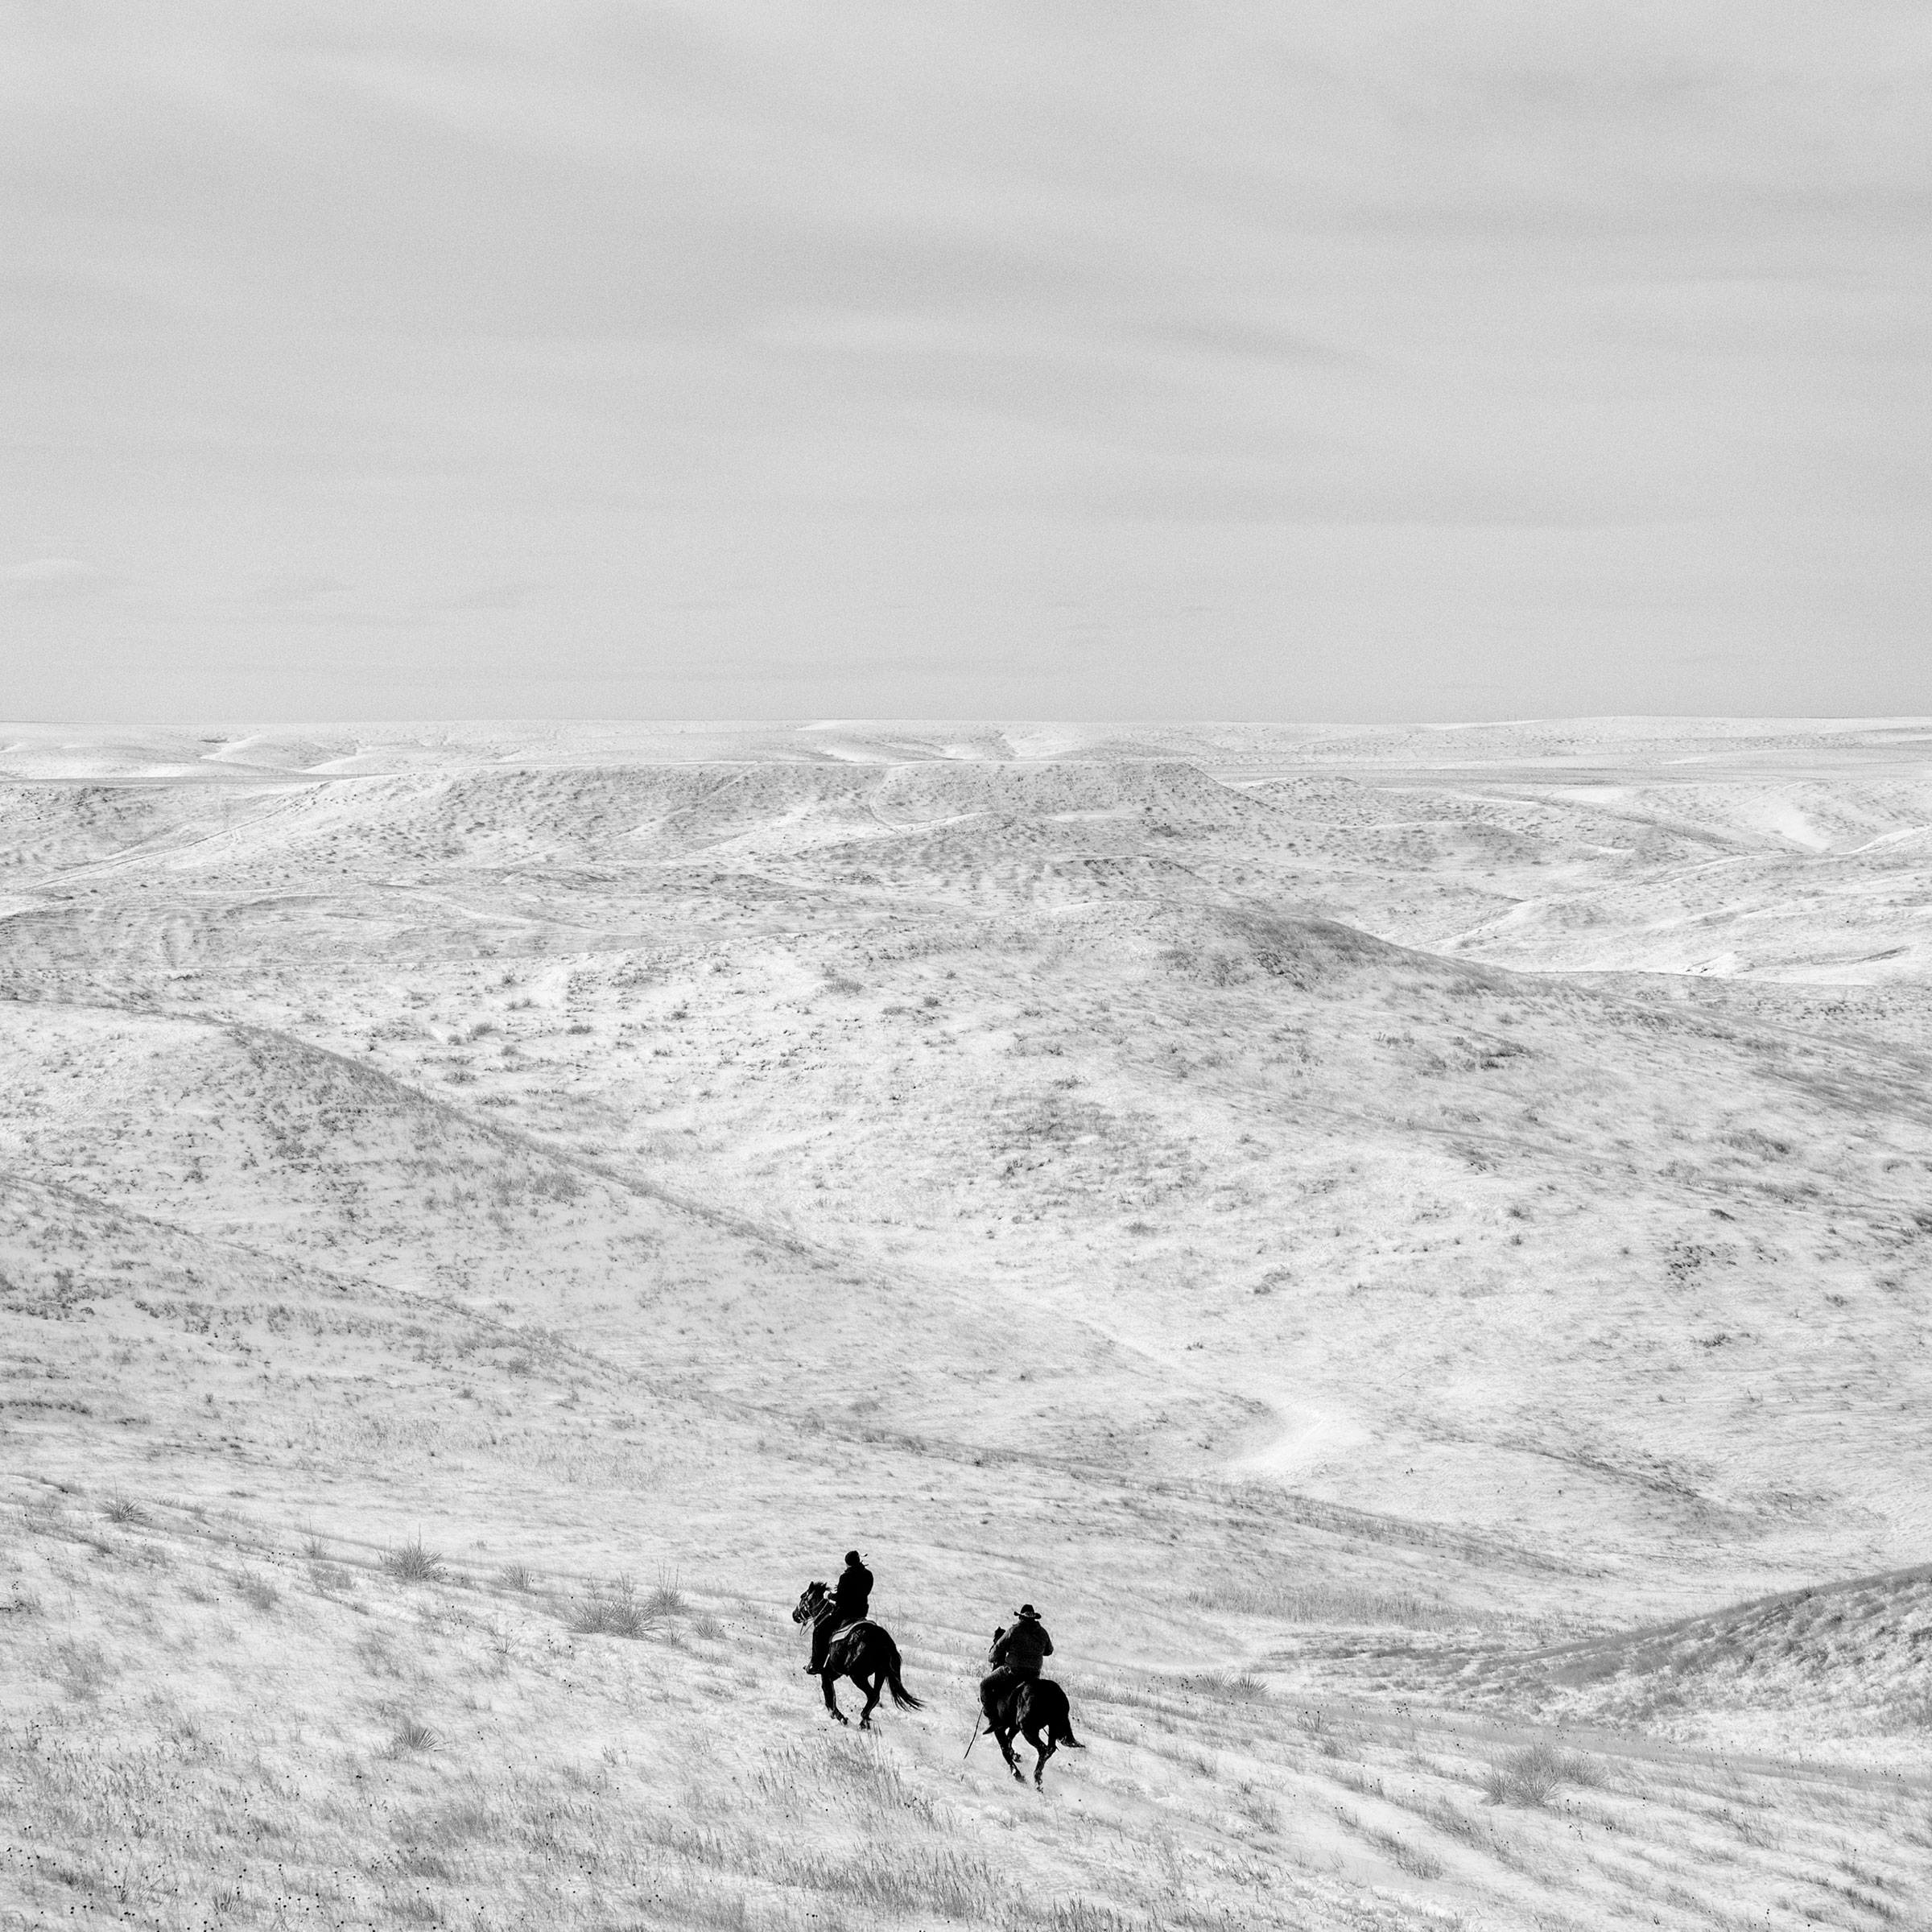 Two horseback riders. Ziebach County, S.D. 2016.